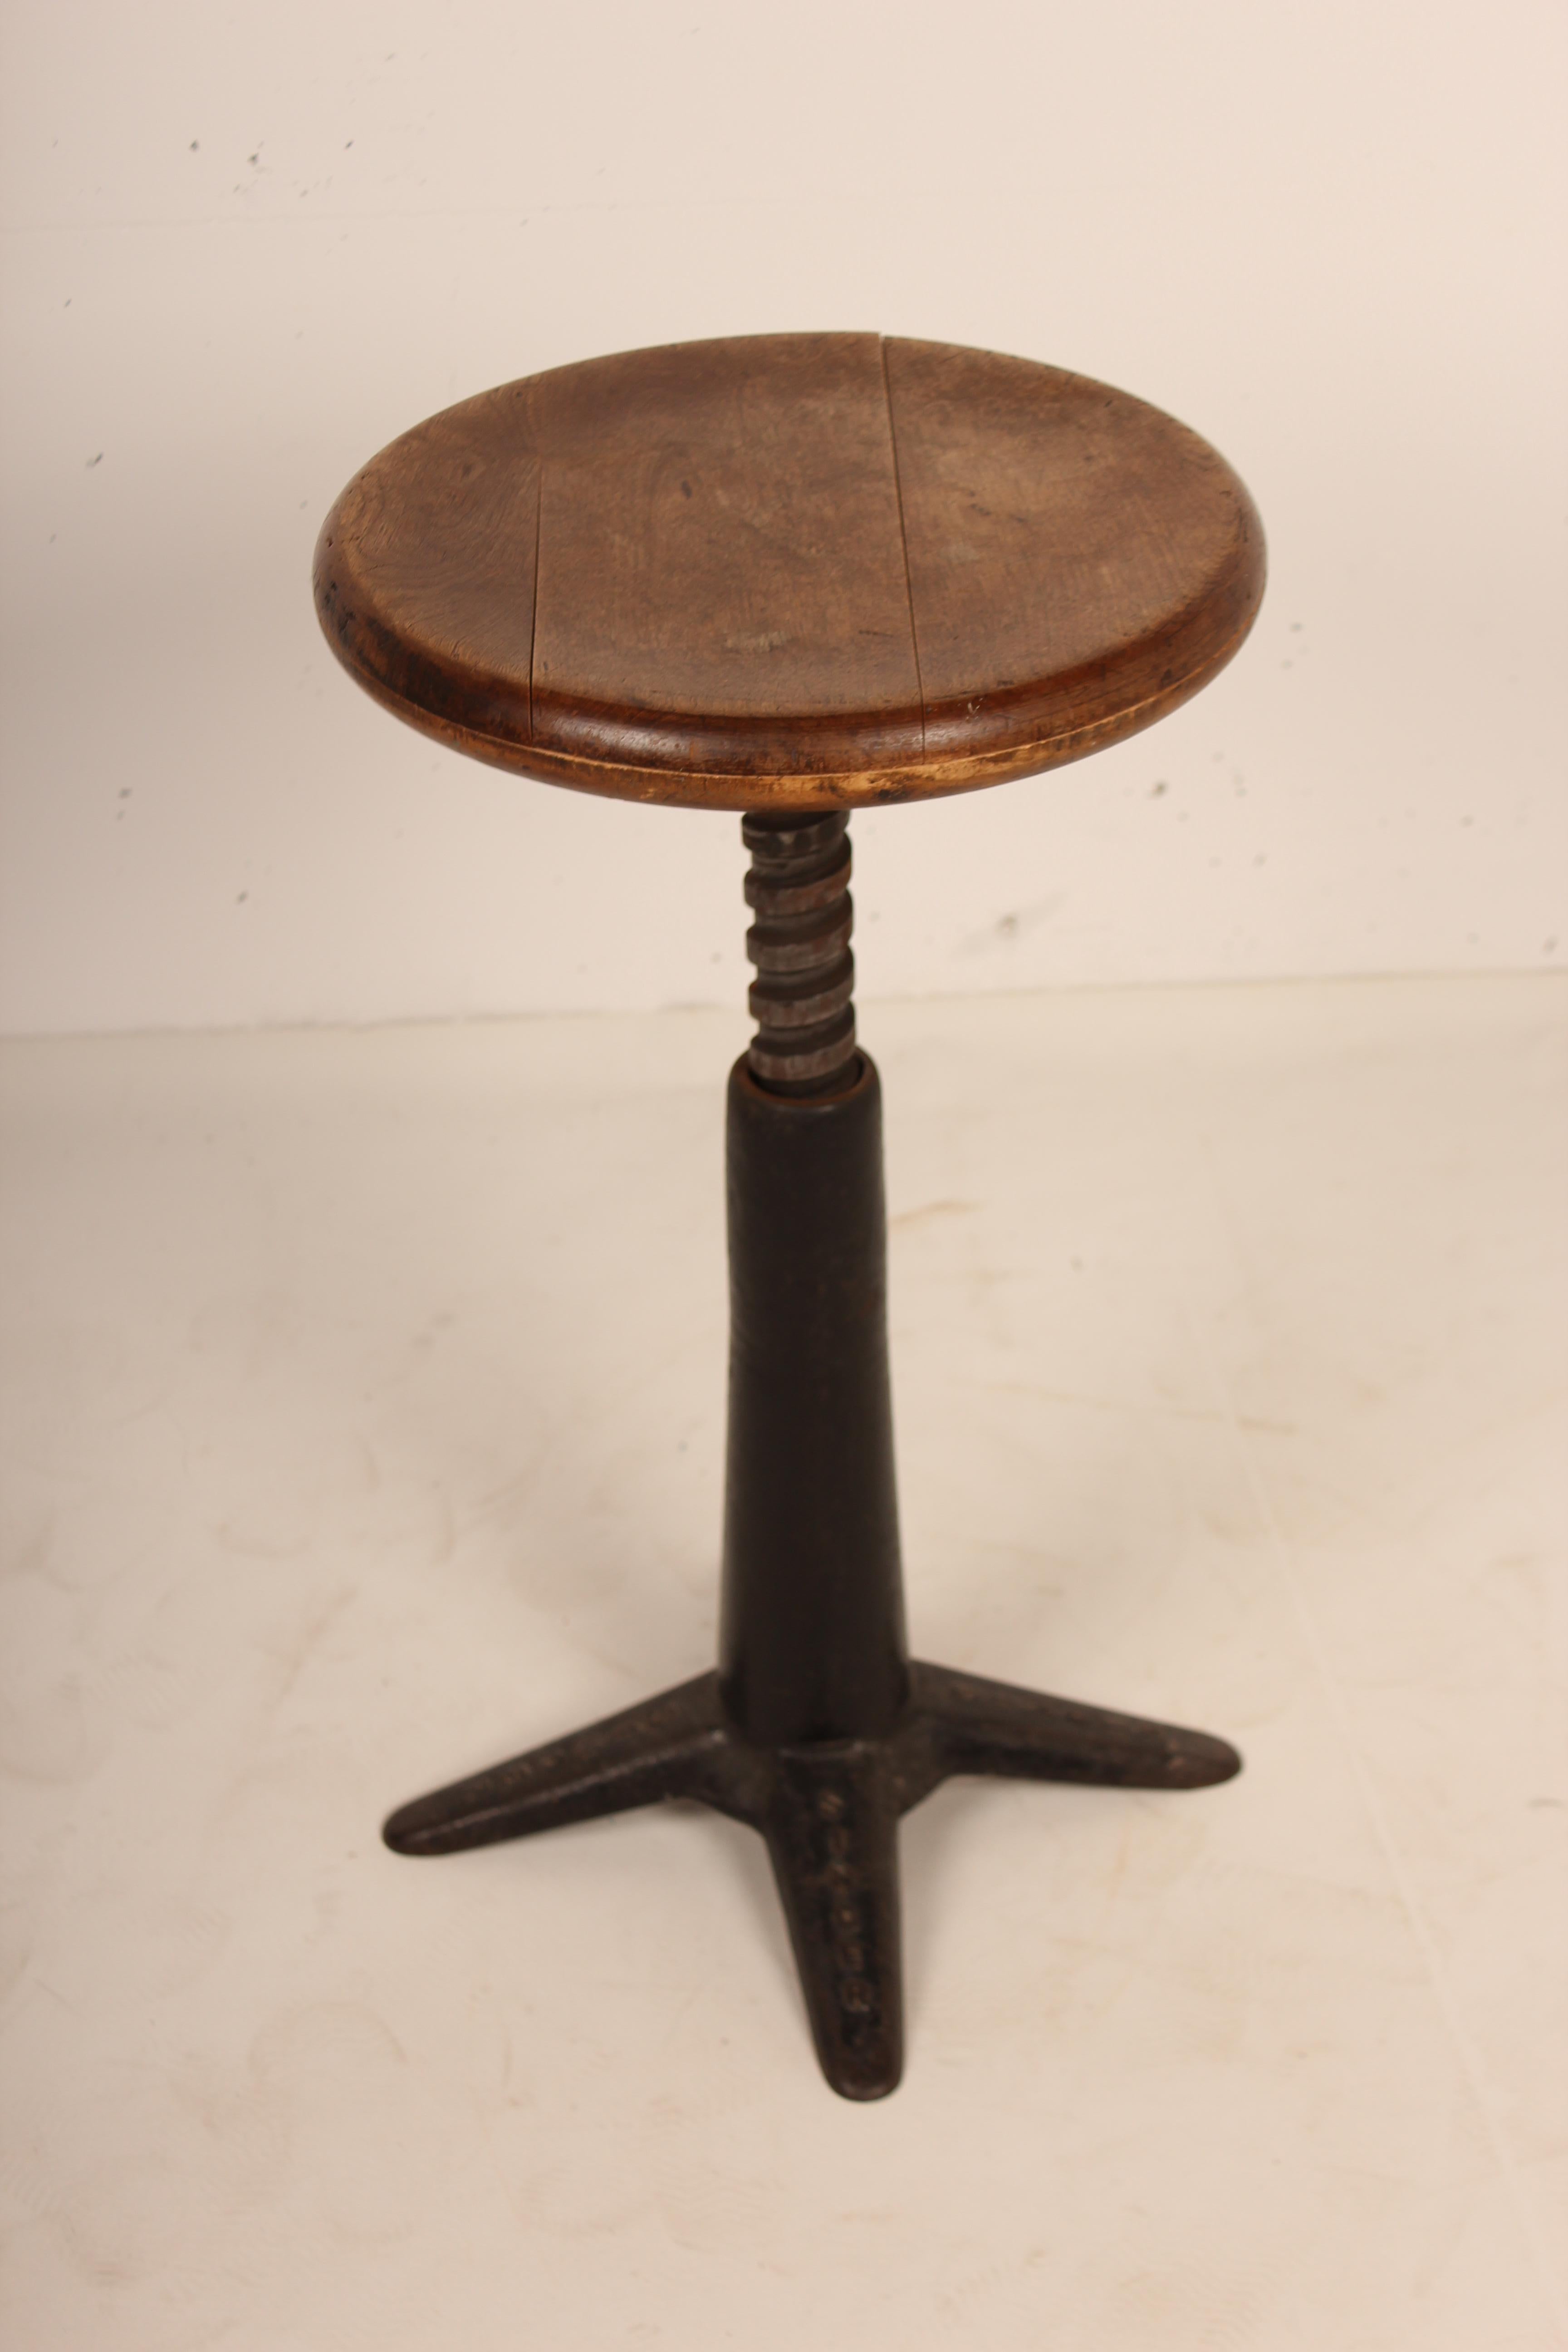 American Industrial Stool Made of Cast Iron from the Singer Factory, 1930